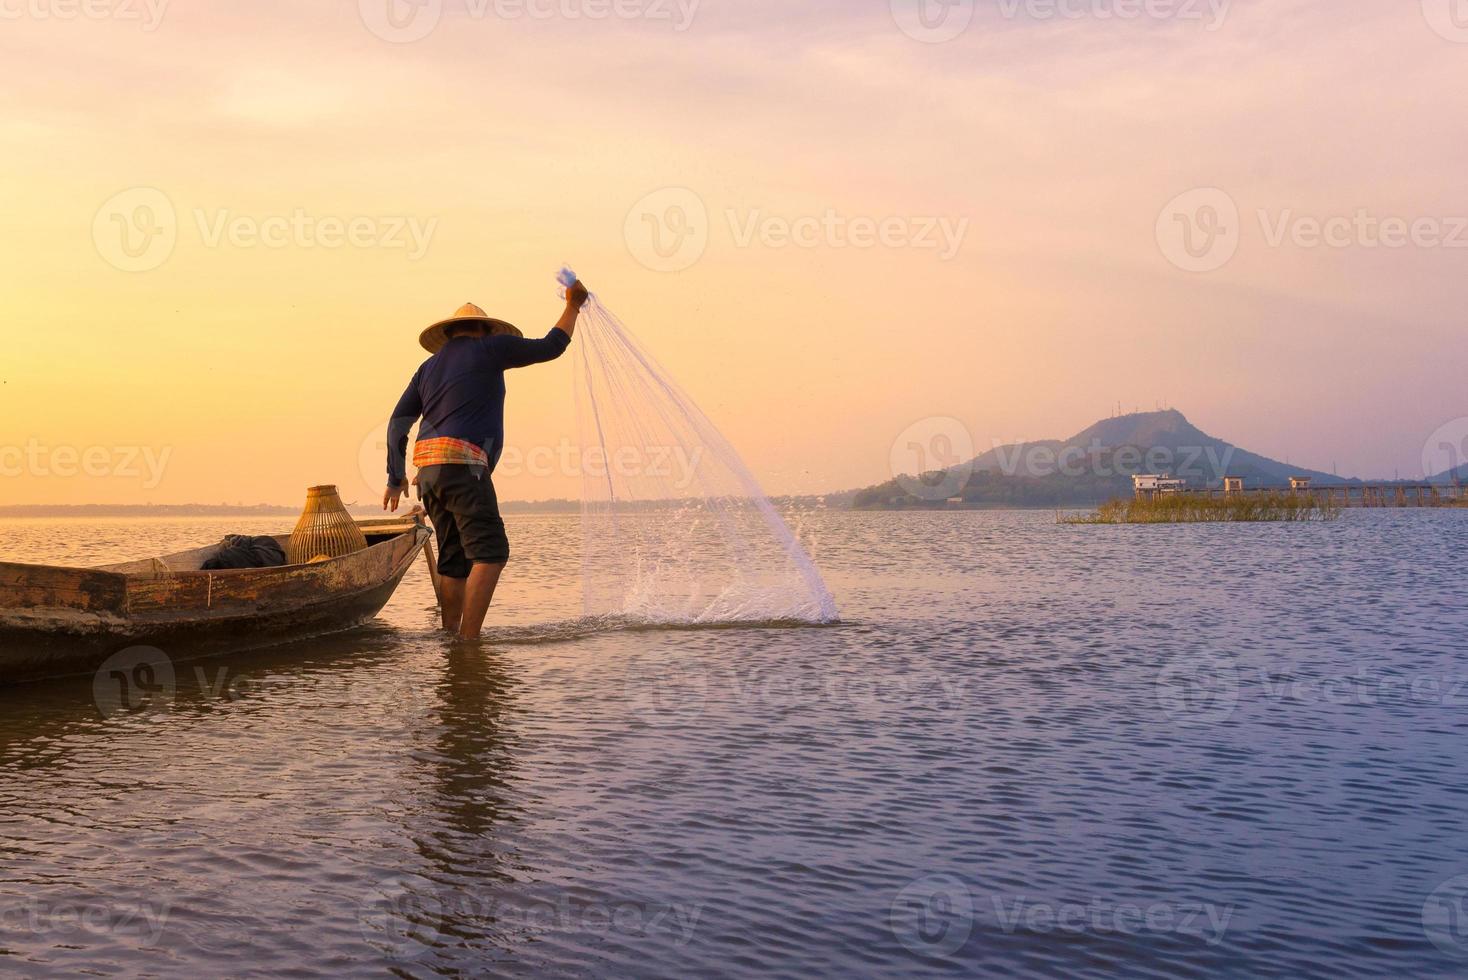 Asian fisherman with wooden boat throwing a net for catching freshwater fish in nature river in the early during sunrise time photo